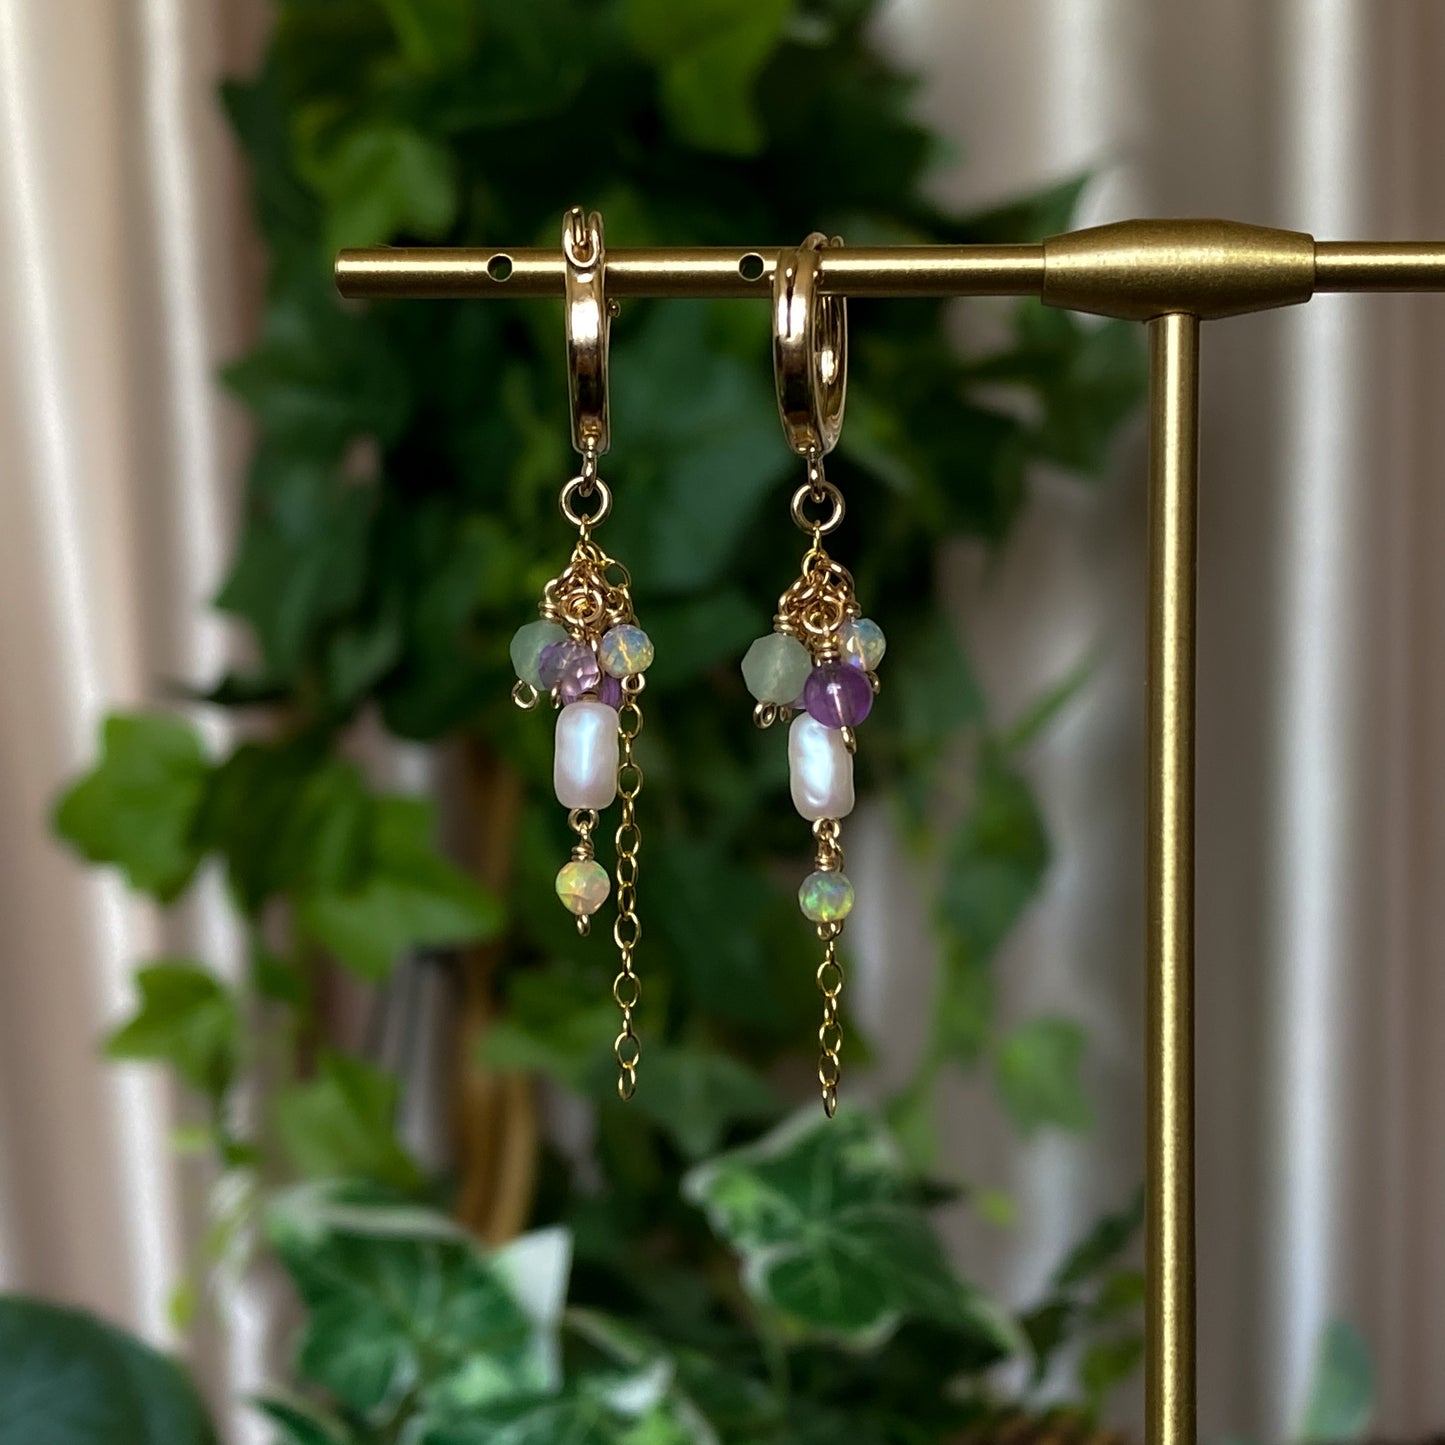 Summer Garden ~ Amethyst, Aventurine, Ethiopian Opal, Vintage Faux Pearl and 14k Gold Filled Mini Layered Dangles